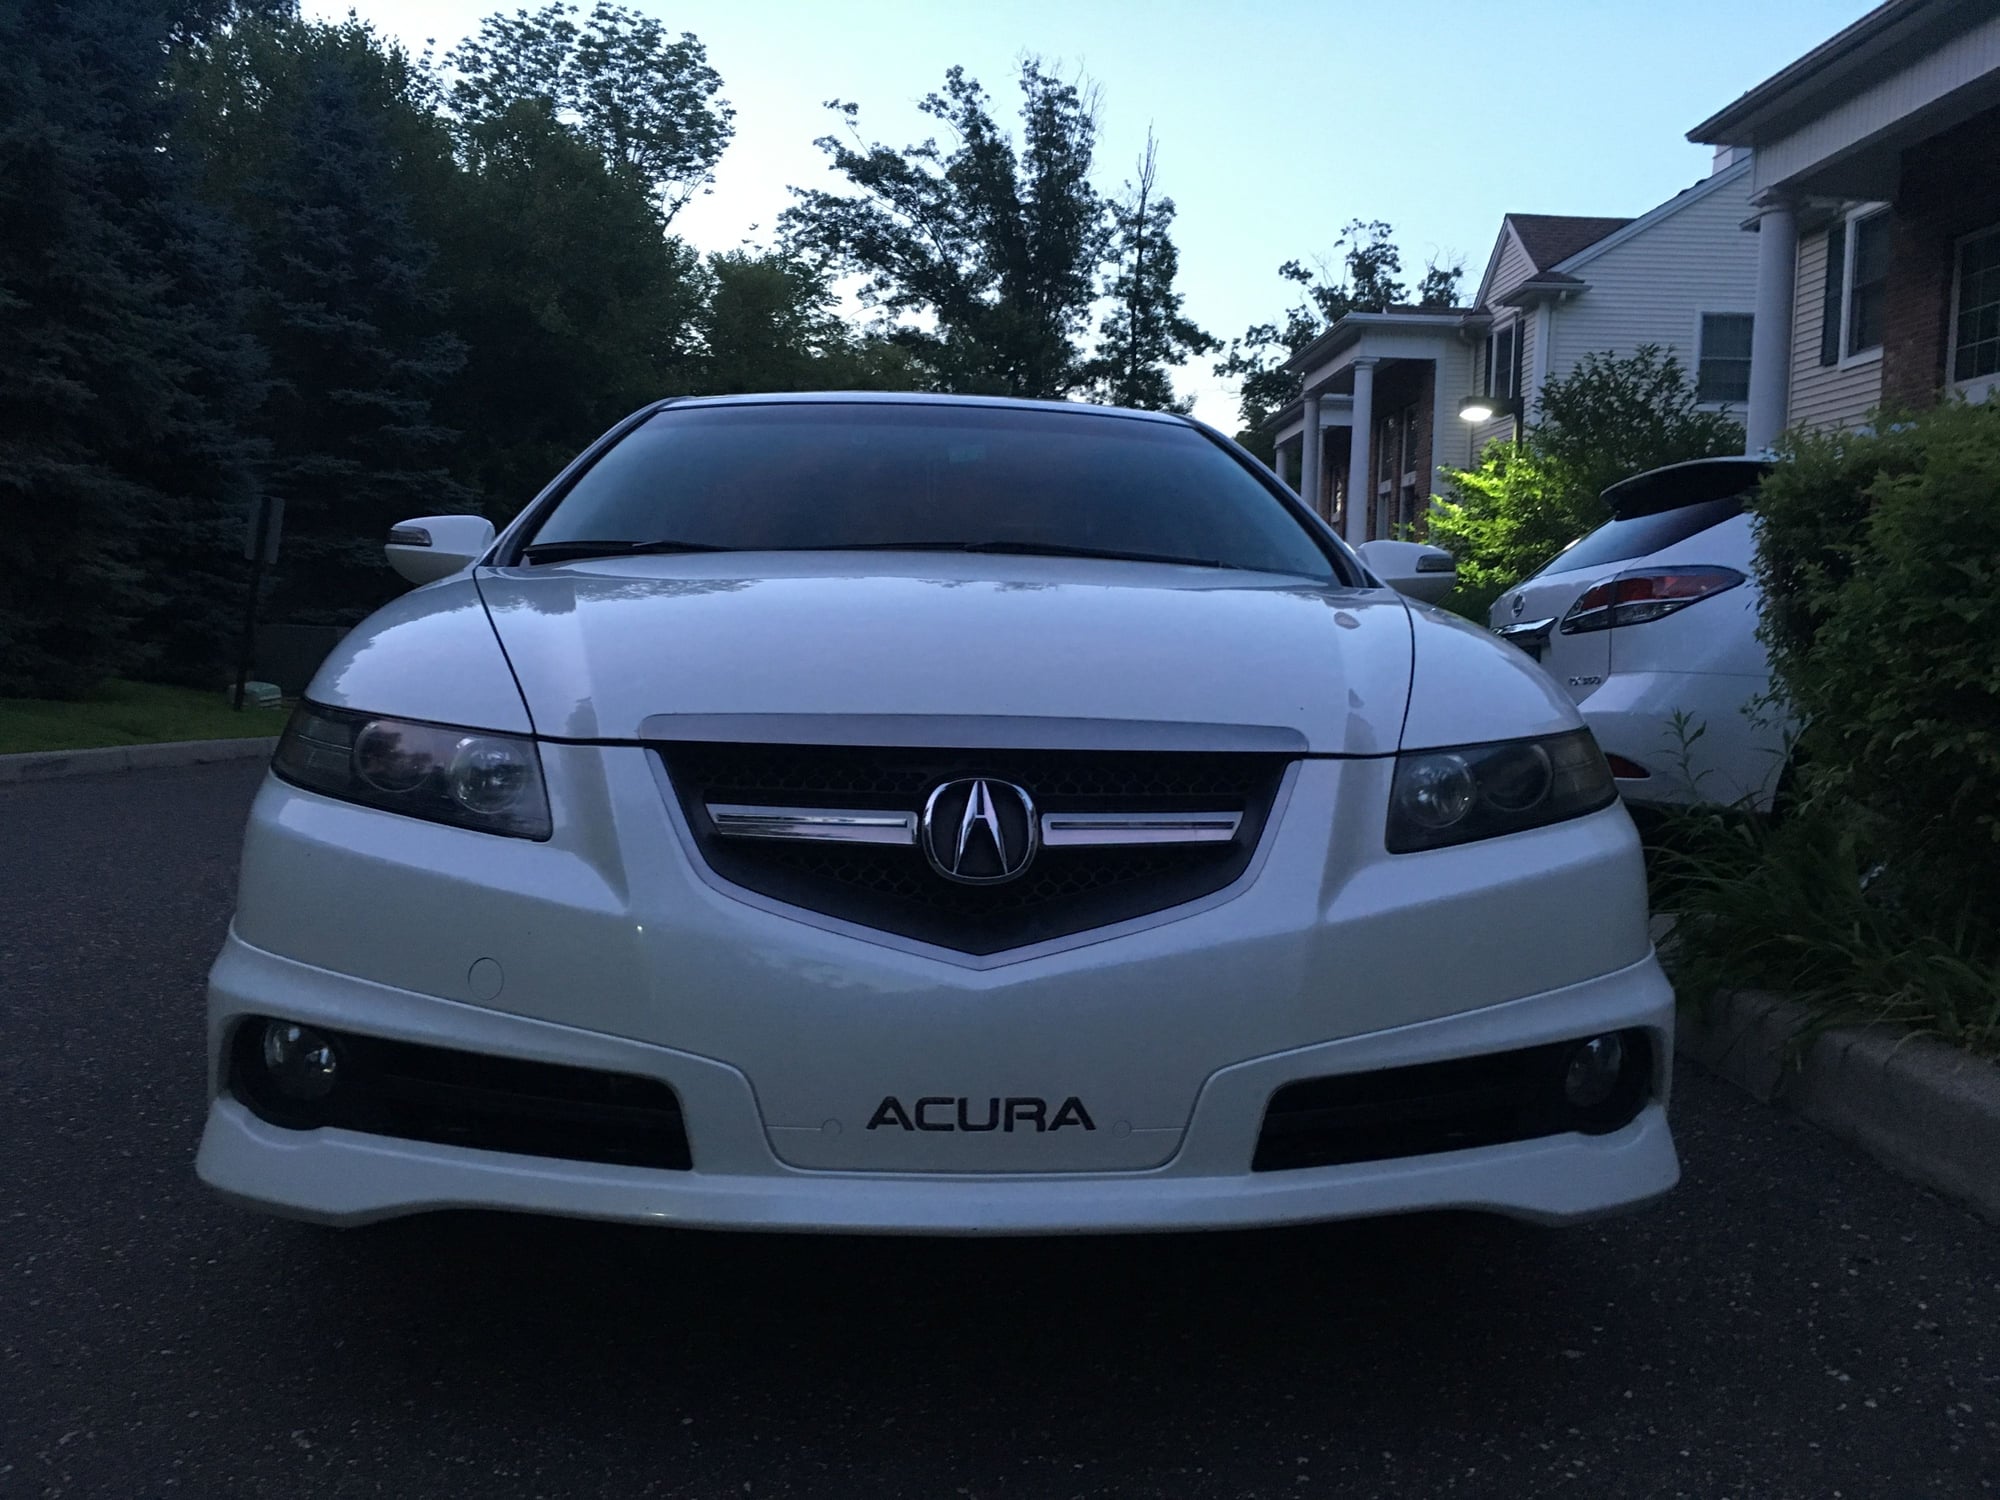 2007 Acura TL - SOLD: WDP 07 Type-s 1owner 130k miles - Used - VIN 19UUA76587A032775 - 130,000 Miles - 6 cyl - 2WD - Automatic - Sedan - White - Danbury, CT 06810, United States